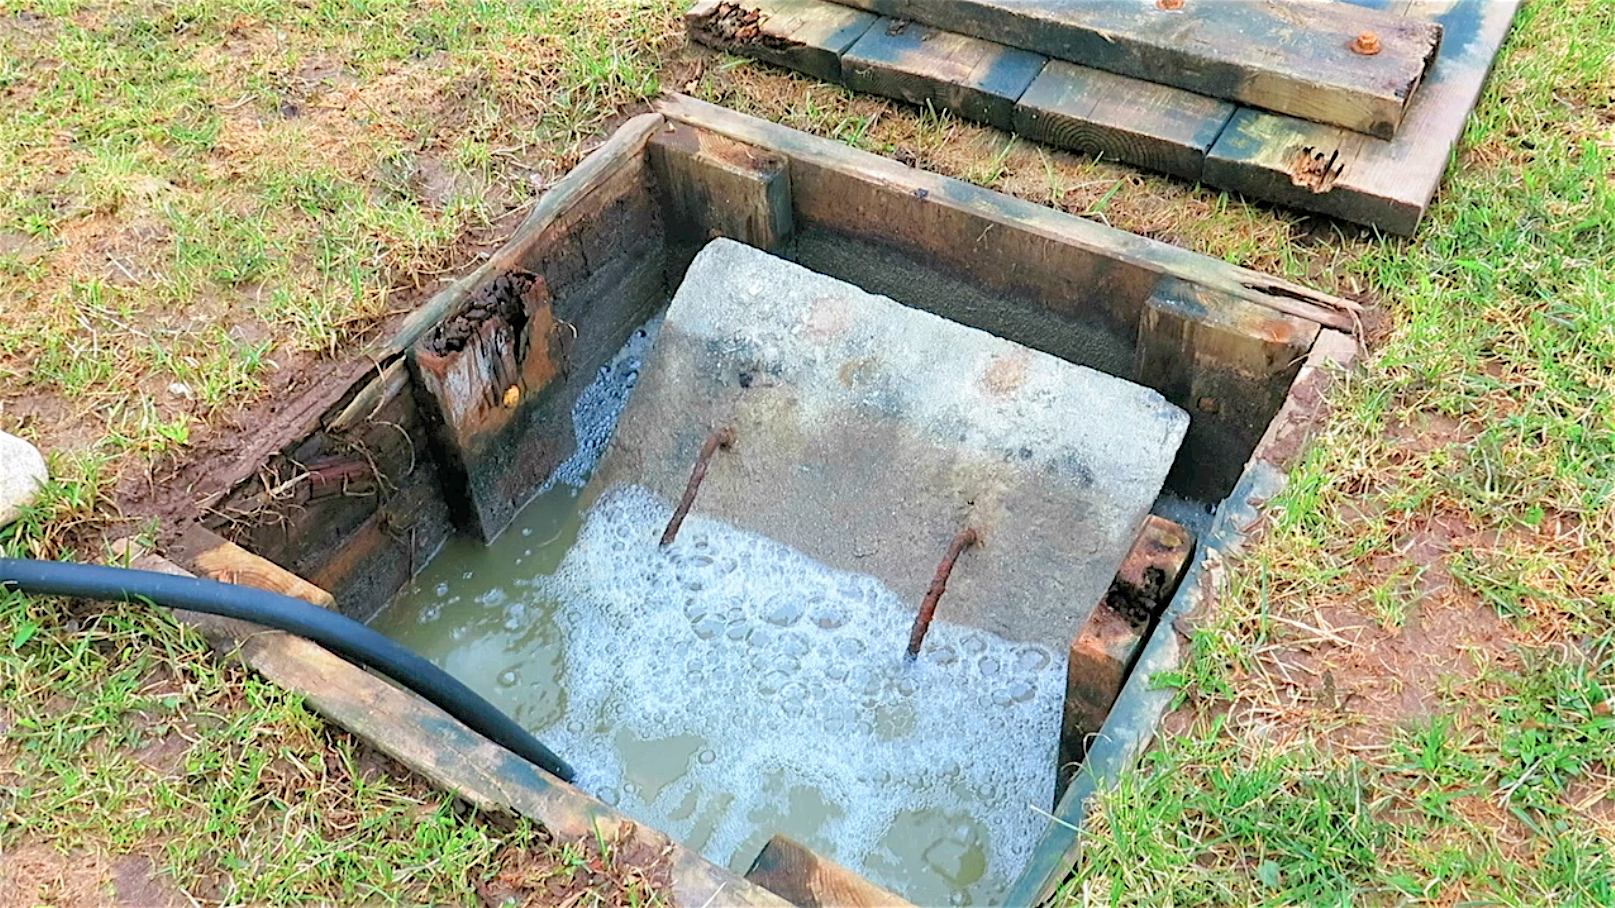 SEPTIC SYSTEM GONE BAD? Fix It Yourself So Trouble Never Happens Again - Baileylineroad